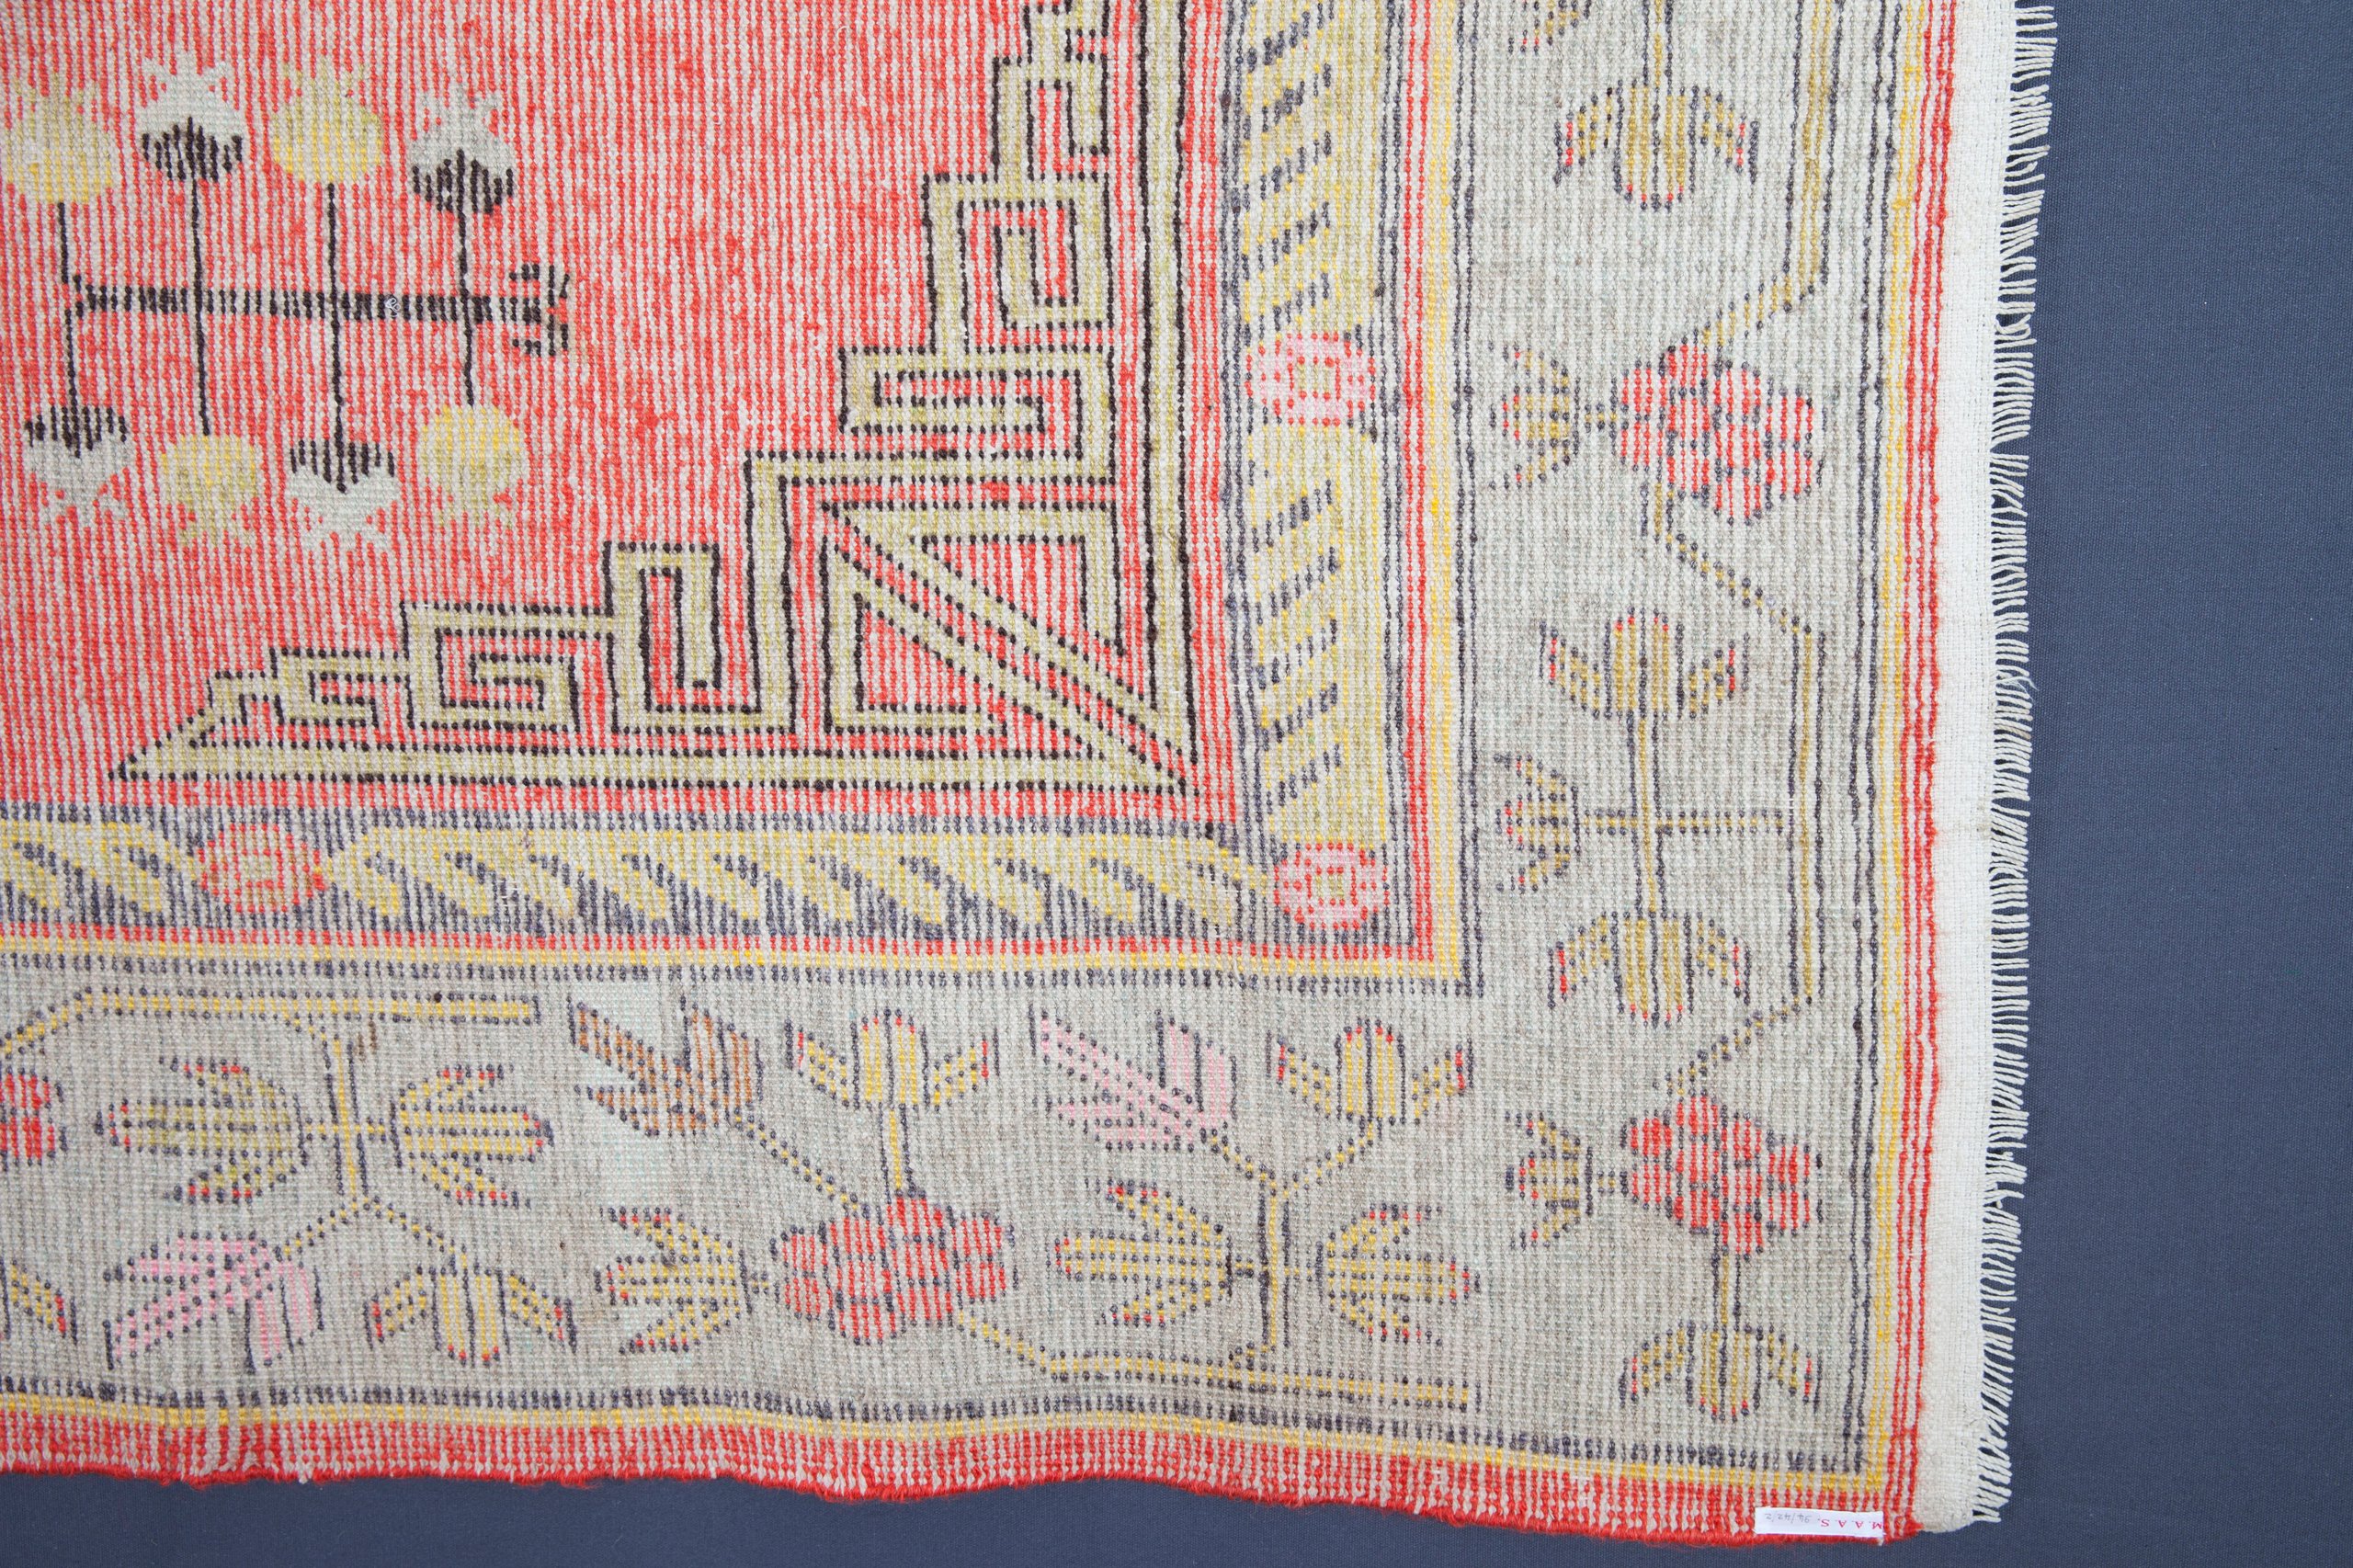 Knotted pile rug from Khotan